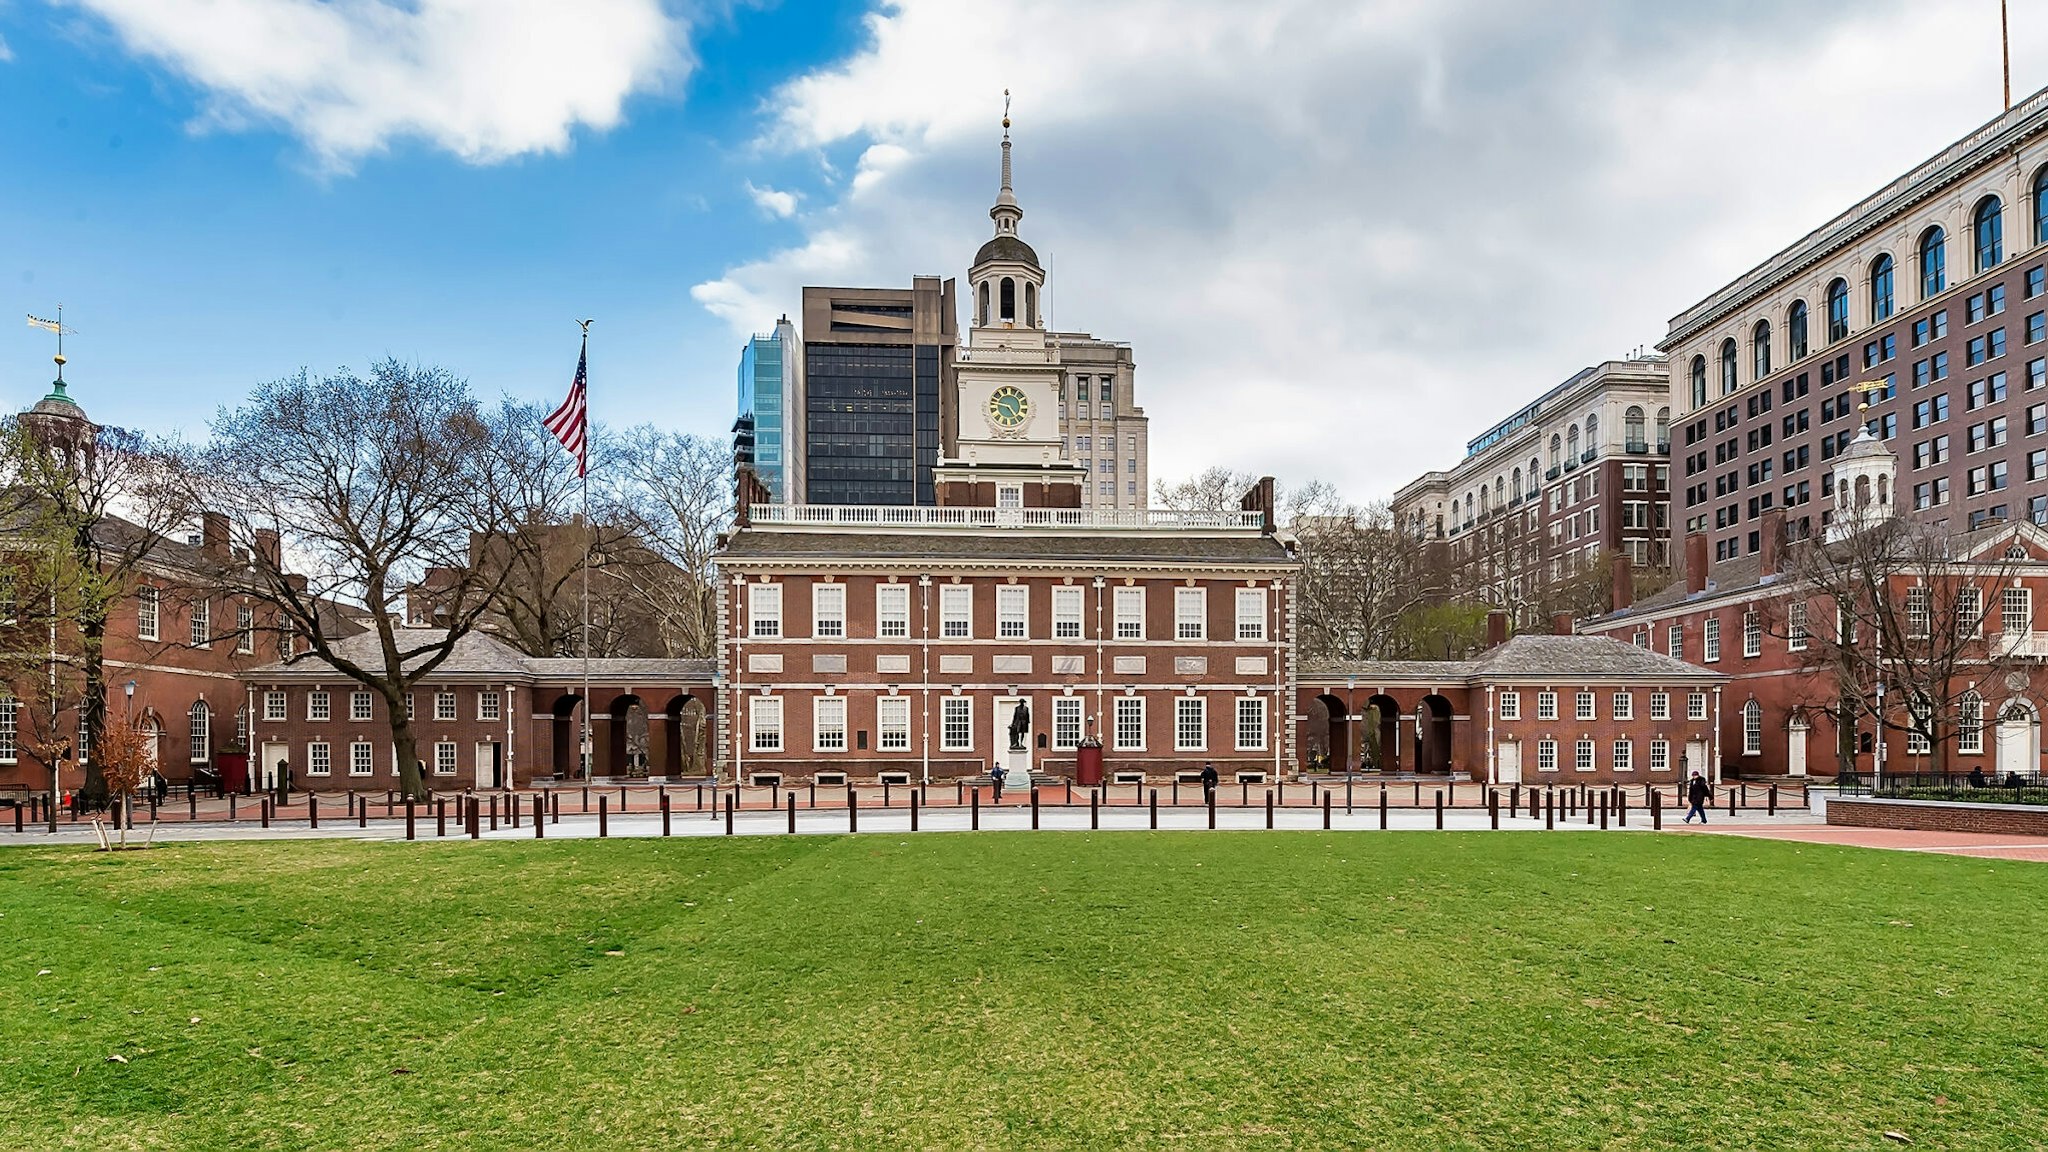 PHILADELPHIA, PA - MARCH 17: Independence Hall is closed to the public due to the coronavirus (COVID-19) outbreak on March 17, 2020 in Philadelphia, Pennsylvania. The tourism and entertainment industries have been hit hard by restrictions in response to the outbreak of COVID-19. (Photo by